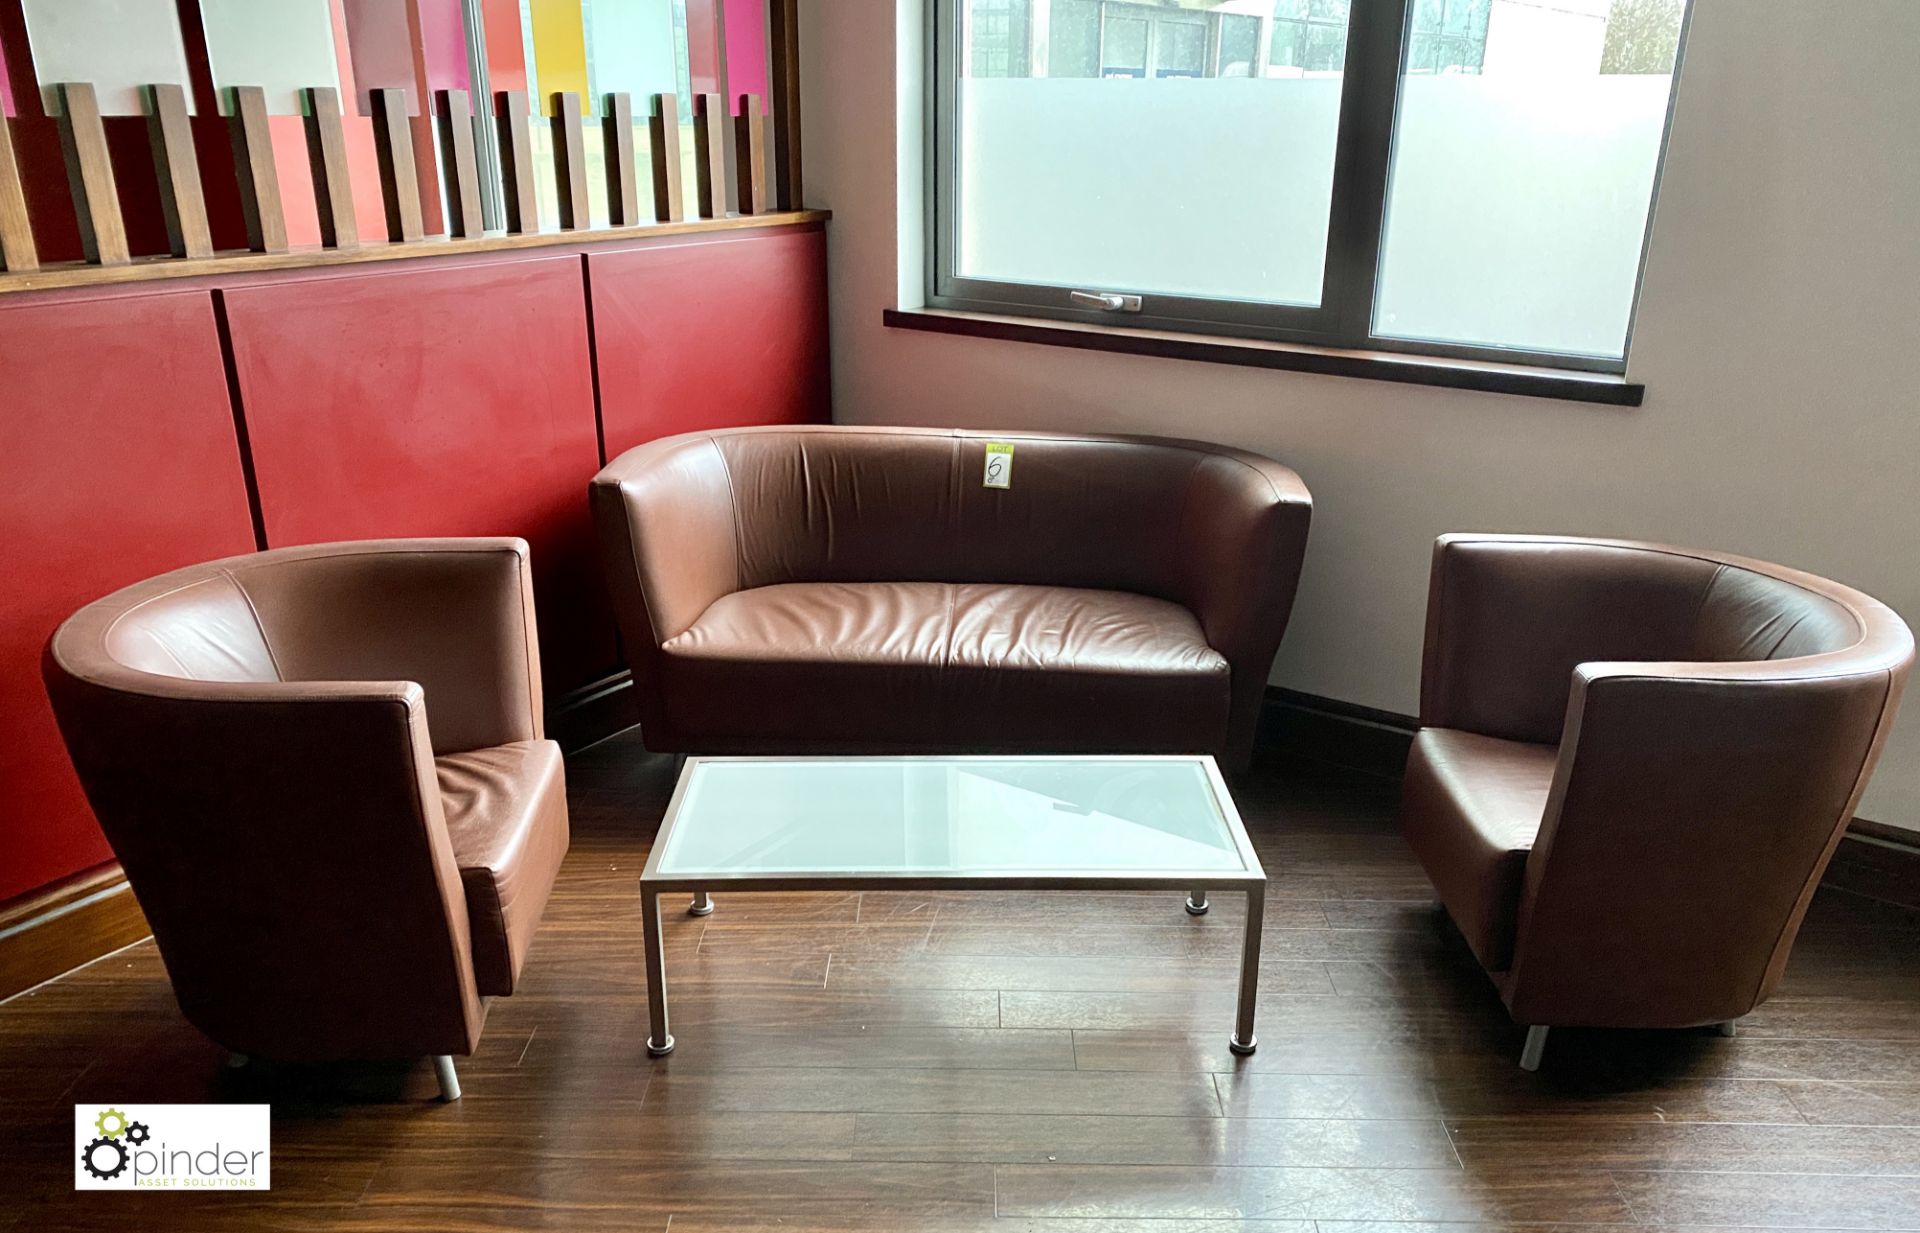 Leather effect Sofa, 2 Armchairs and chrome/glass Coffee Table (located in Coffee Shop)